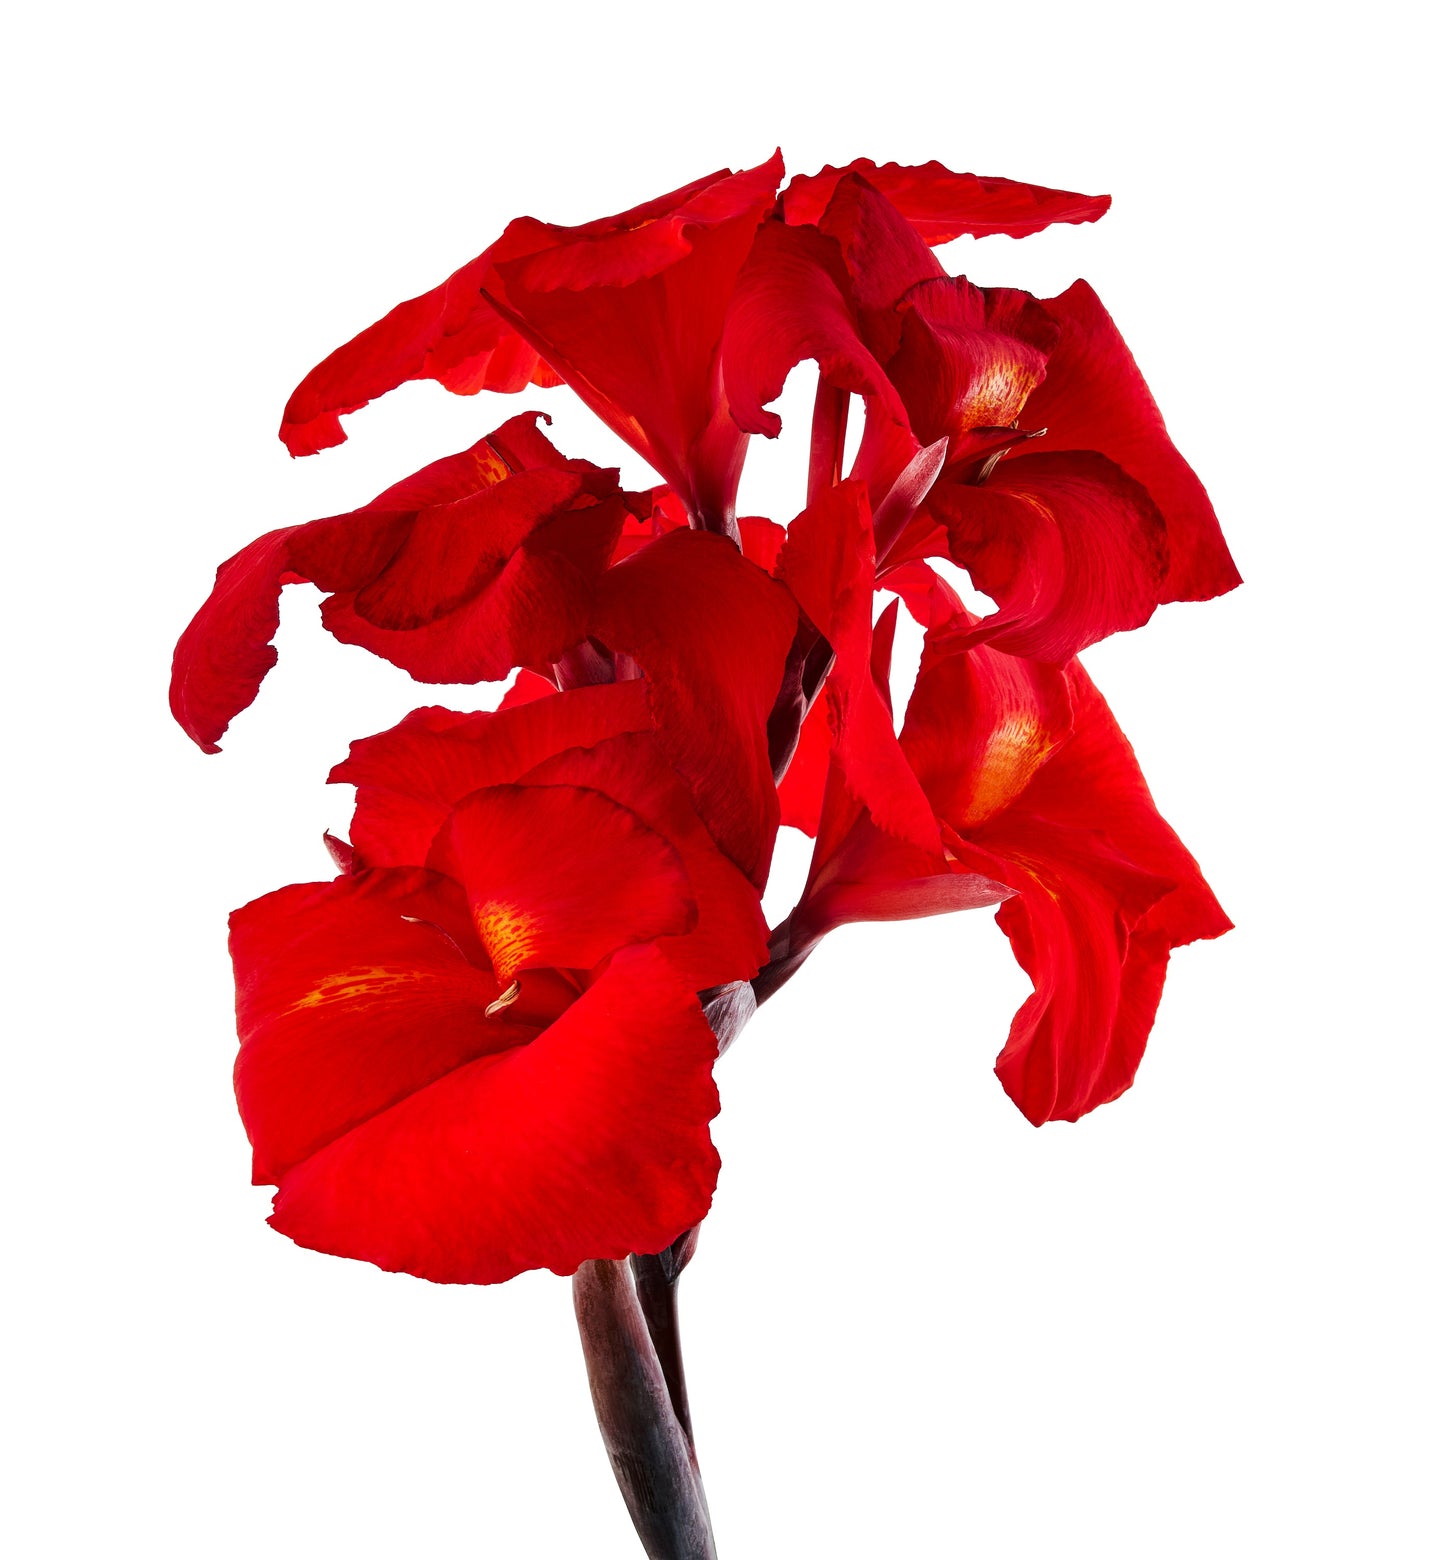 5 RED CANNA LILY Indian Shot Canna Indica Flower Seeds